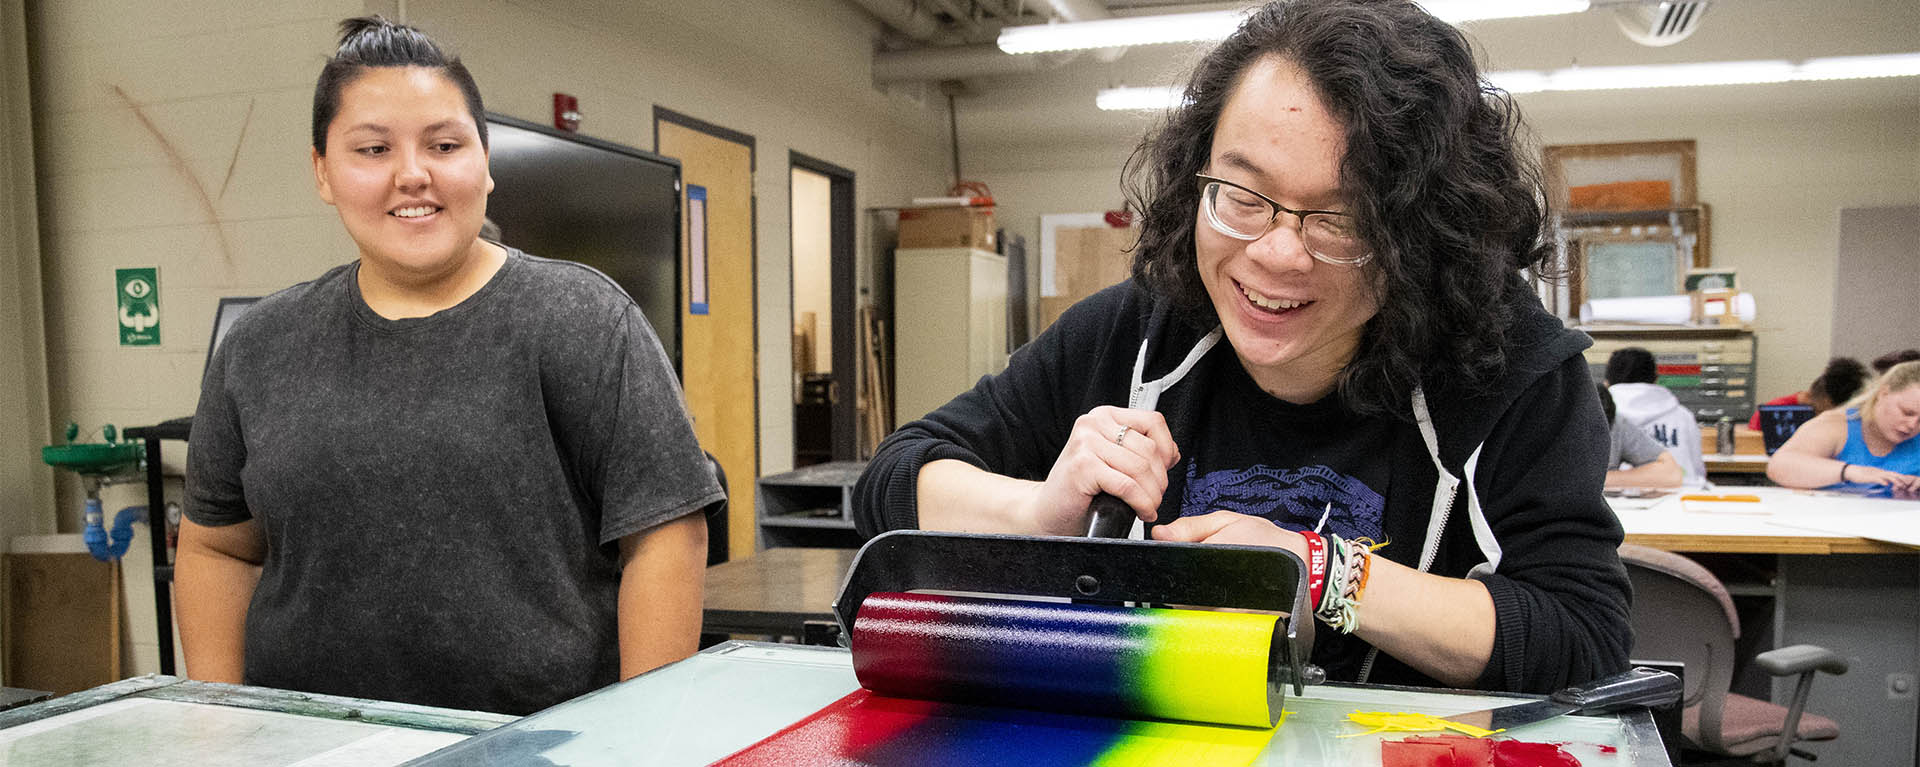 A student laughs while rolling ink during a print making class.